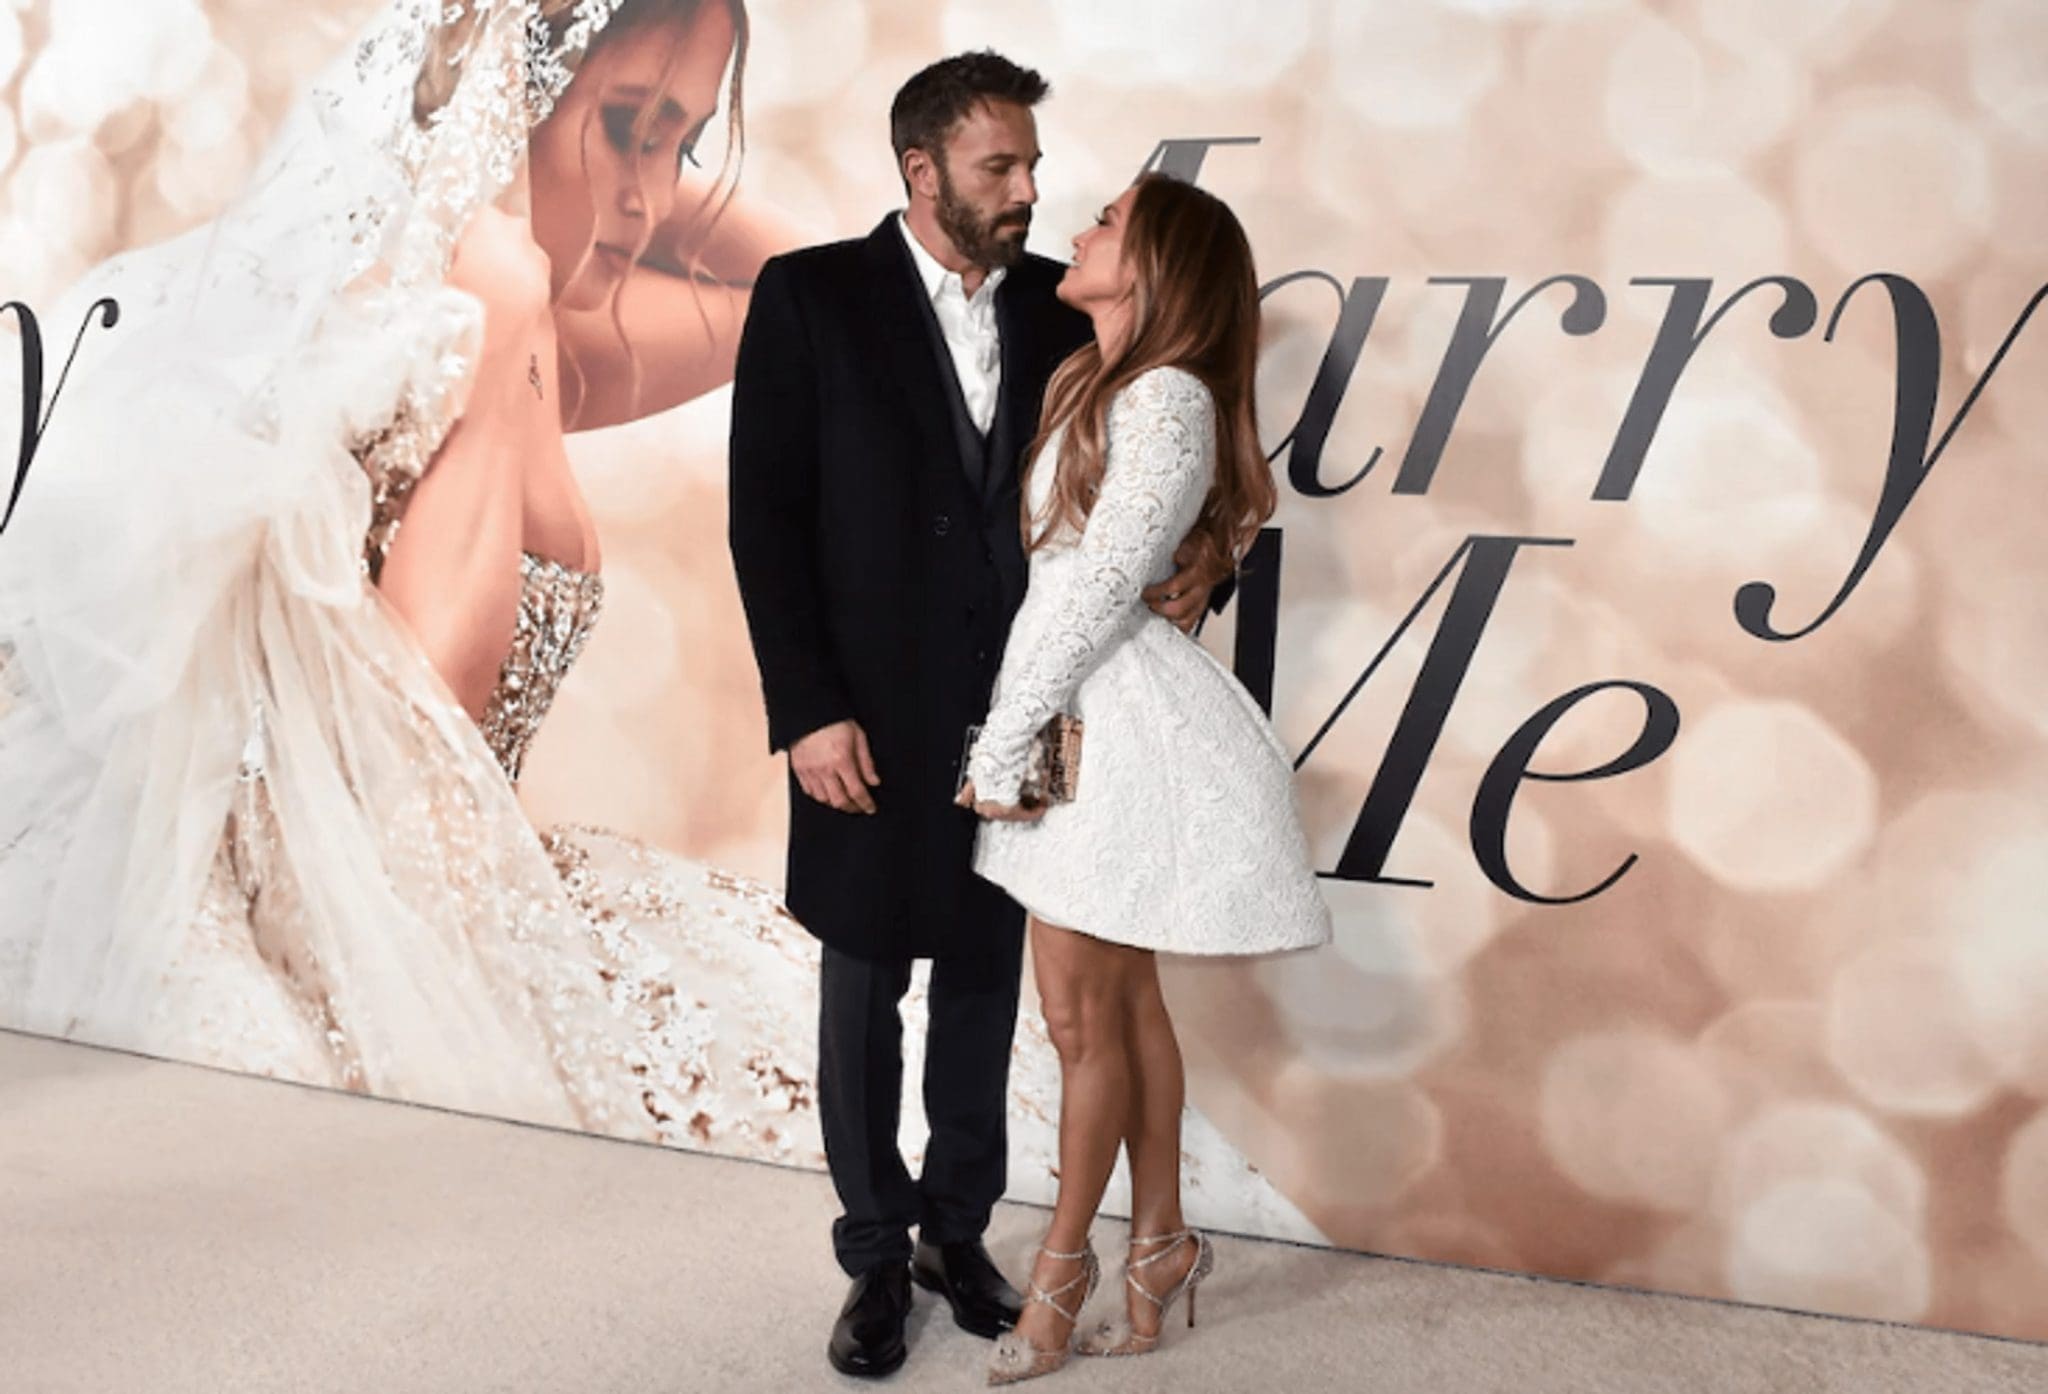 Nevada Court Records Show that Ben Affleck And Jennifer Lopez Were Wed On Saturday Last Week